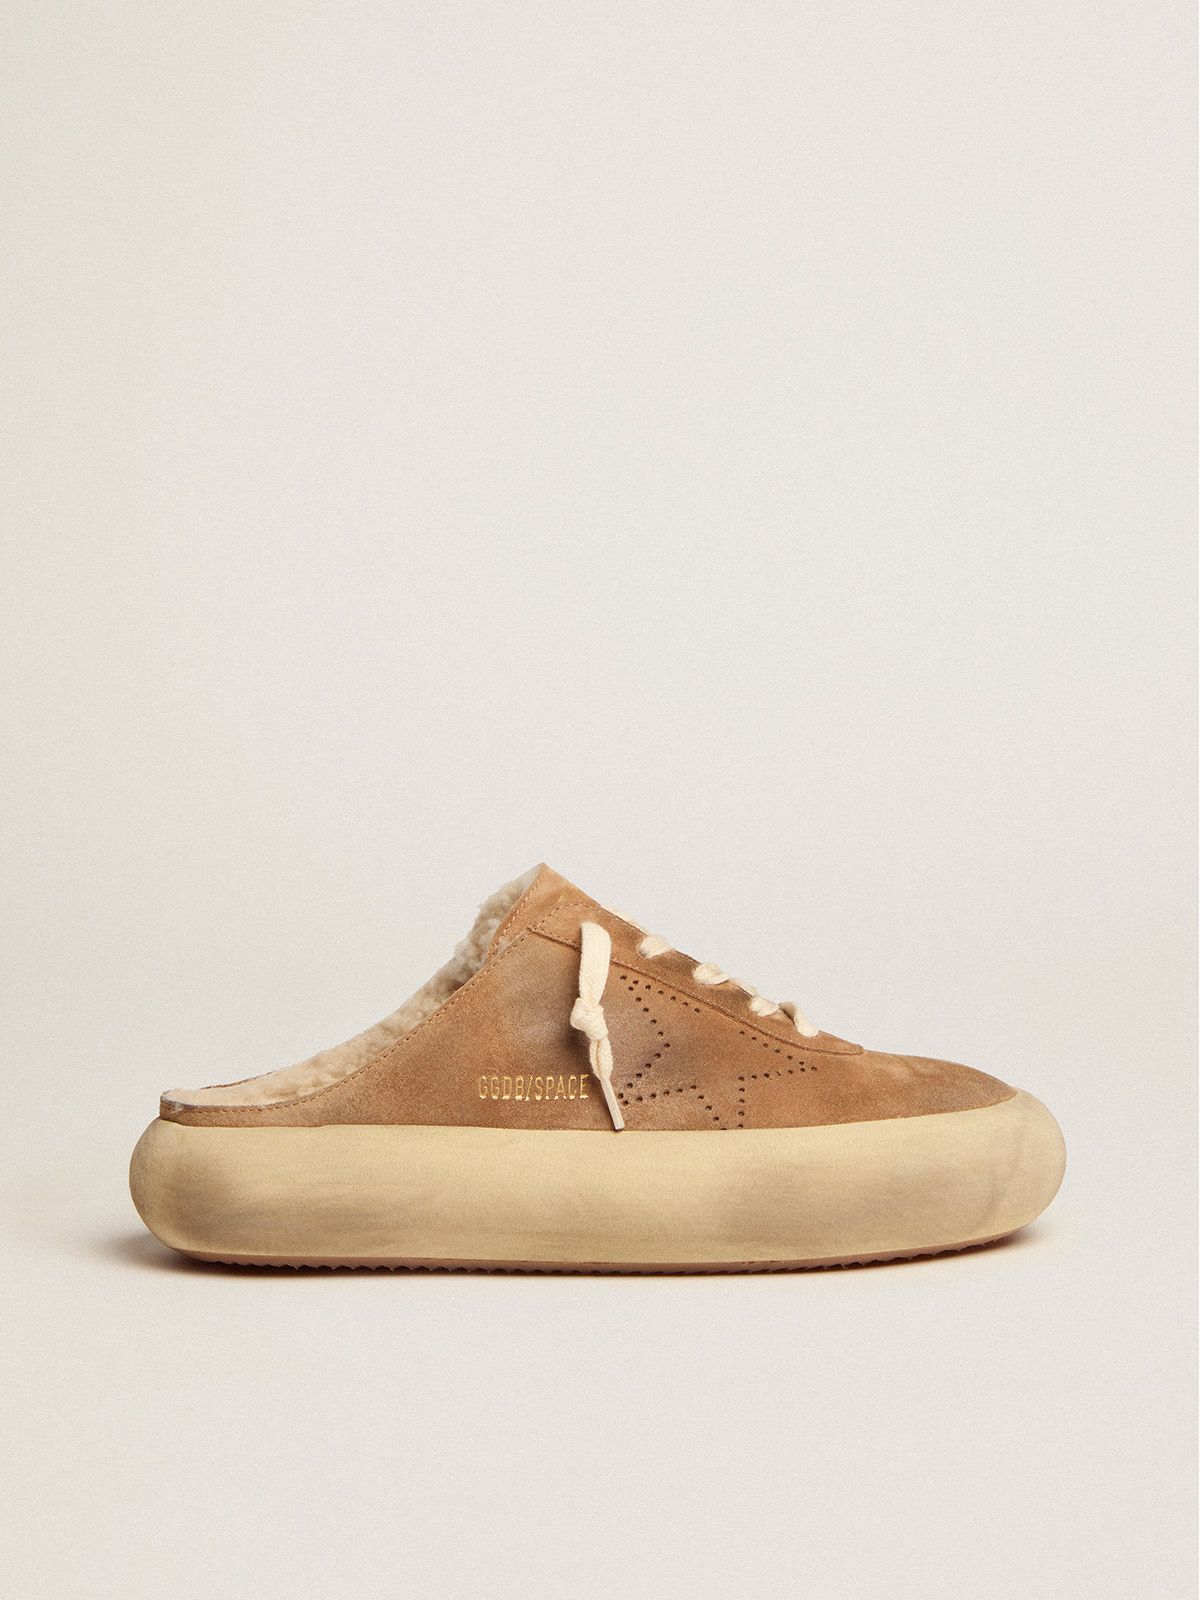 golden goose shearling tobacco-colored shoes Space-Star suede with lining in Sabot